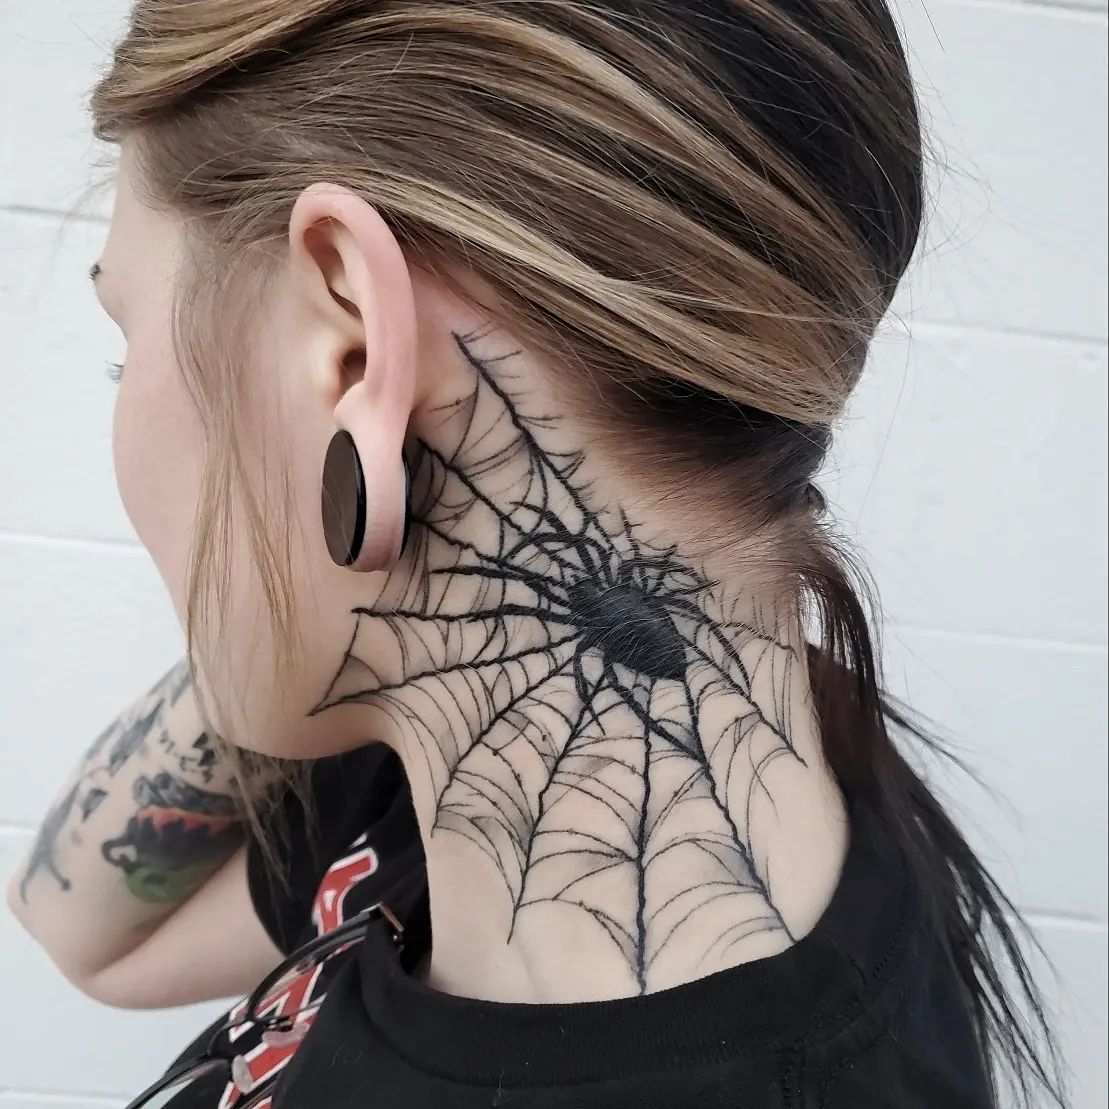 barsha banerjee recommends spiderweb tattoo on elbow pic